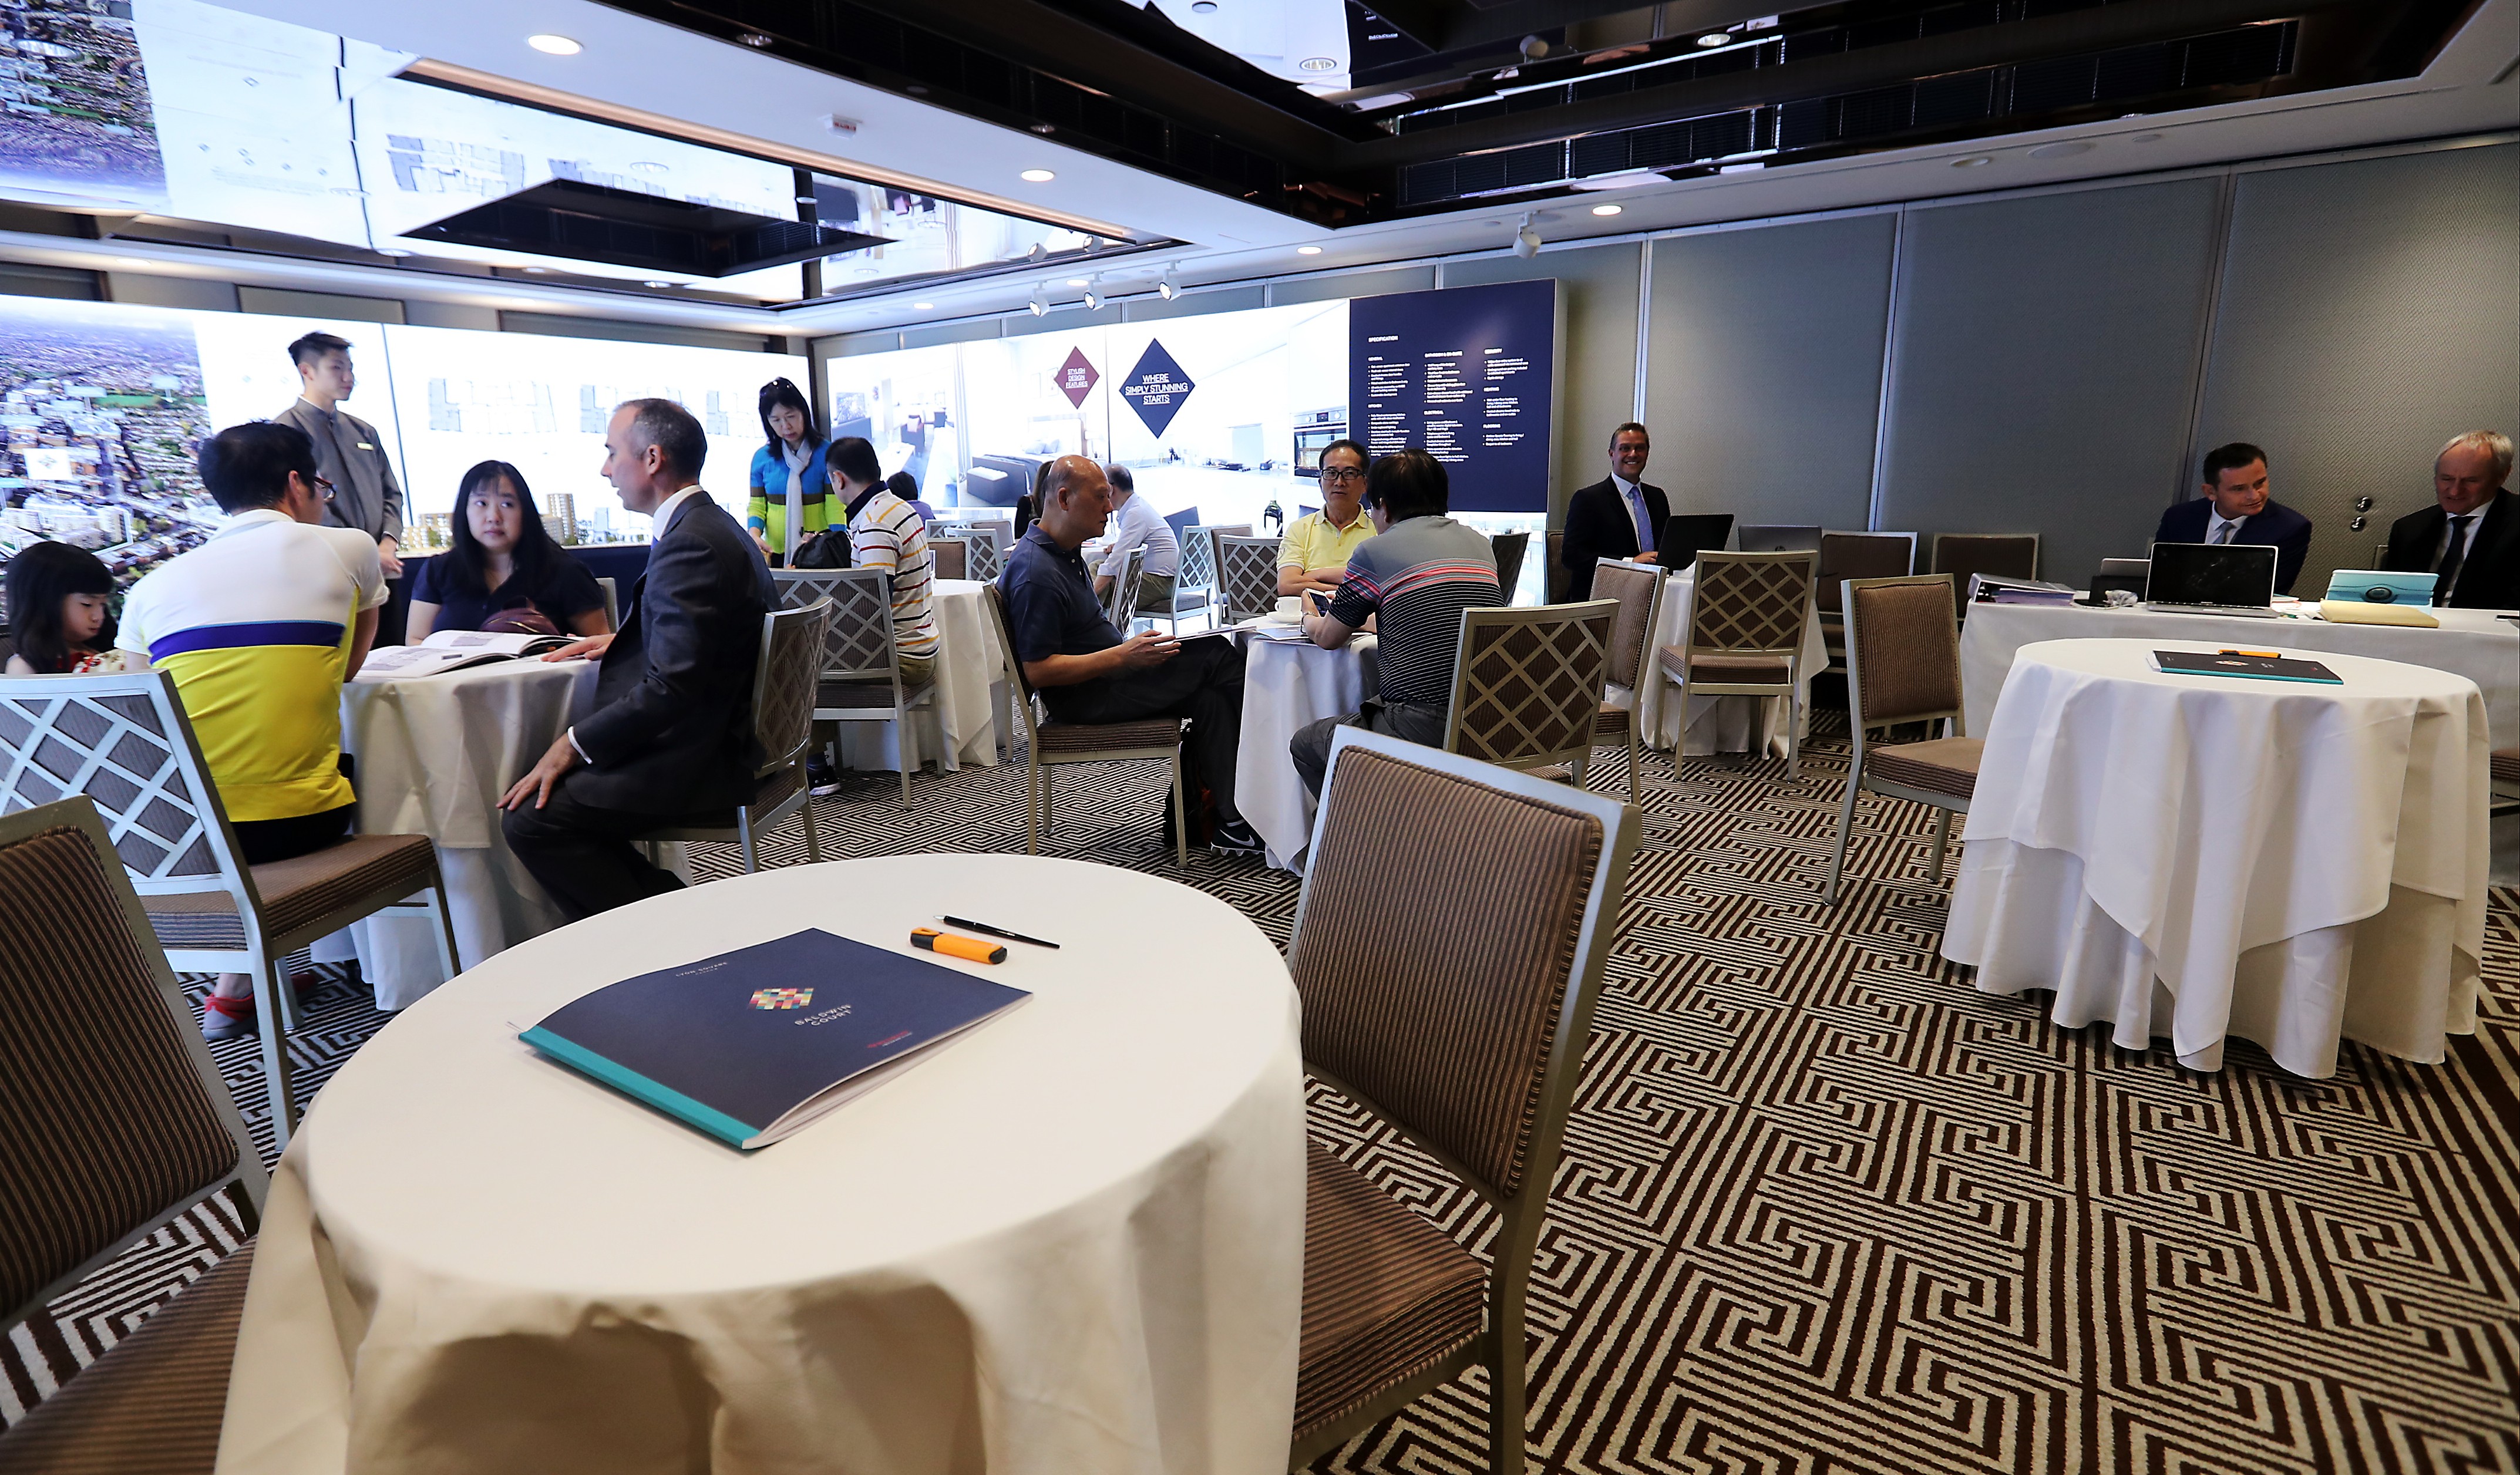 There are few potential buyers at the first London property exhibition in Hong Kong since the general election. Photo: Edward Wong